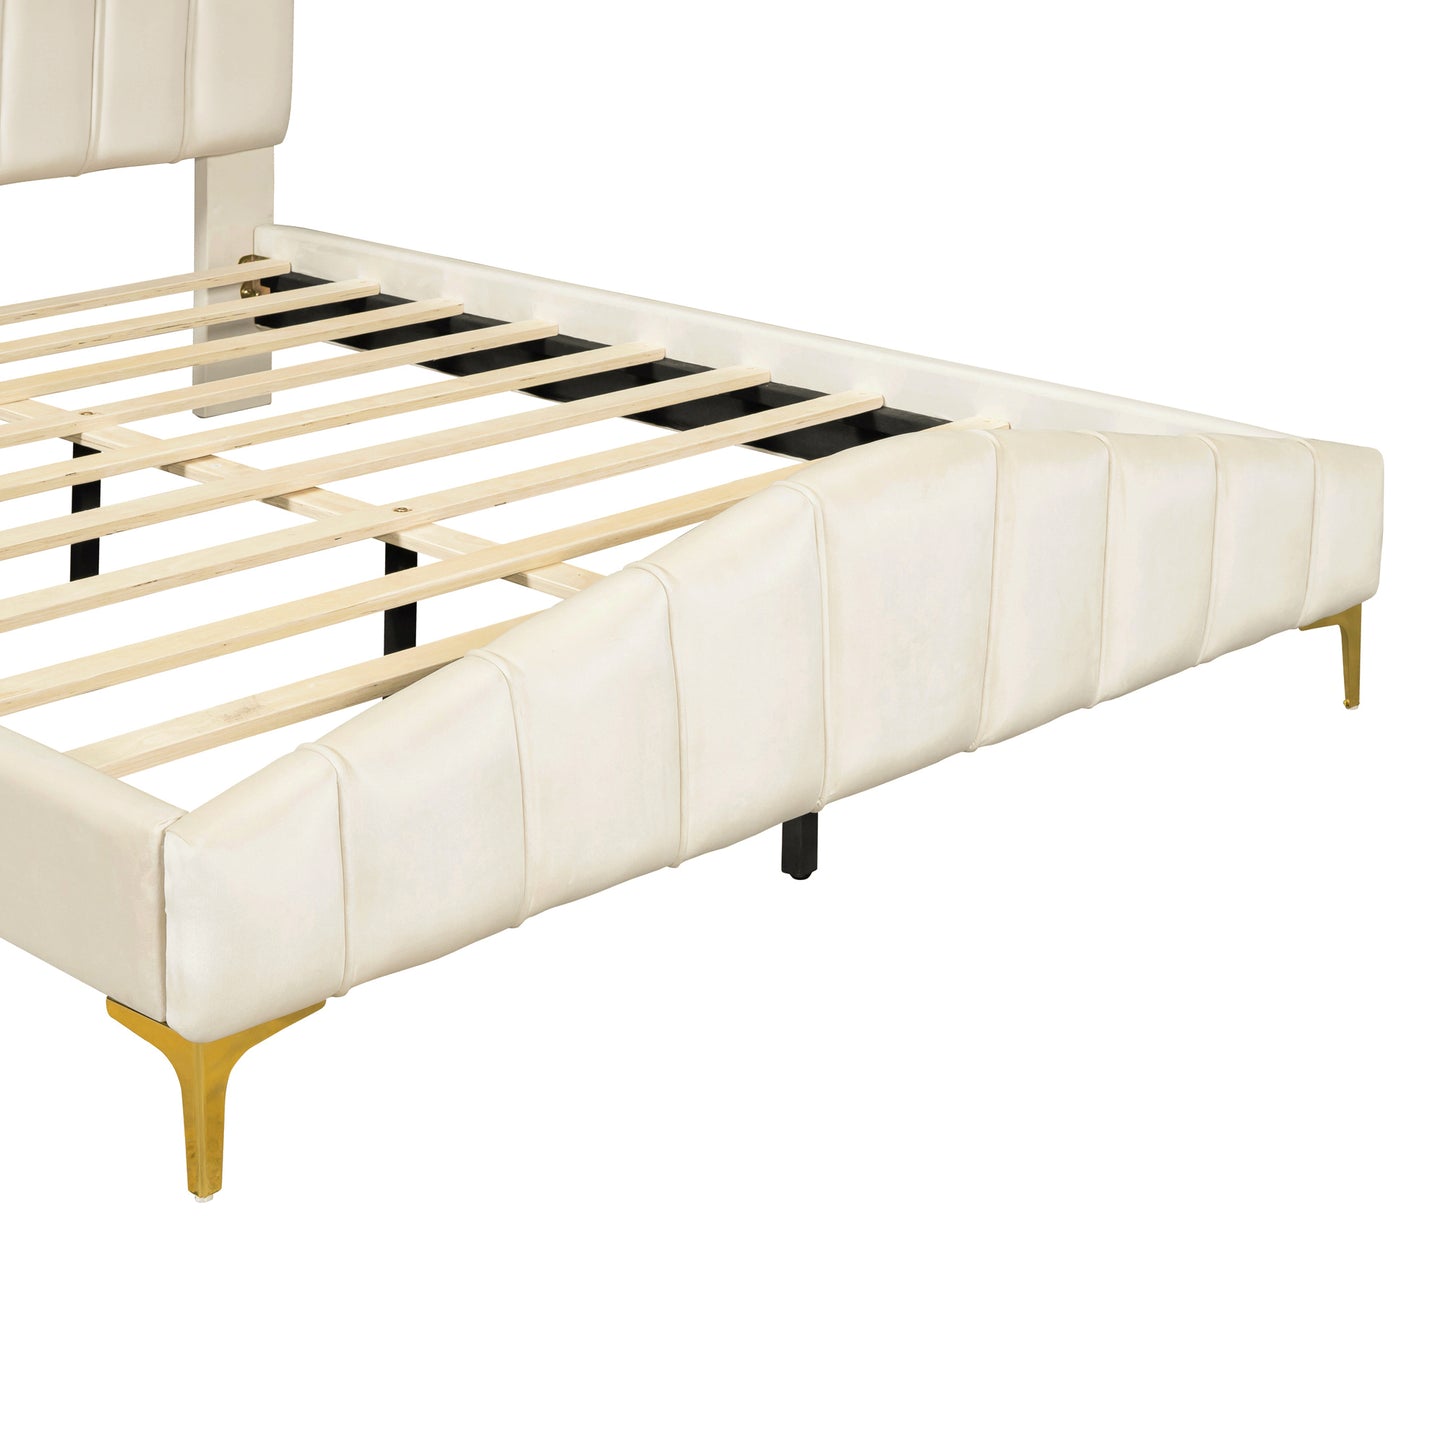 Queen Size Velvet Platform Bed with Thick Fabric, Stylish Stripe Decorated Bedboard and Elegant Metal Bed Leg, Beige - Enova Luxe Home Store